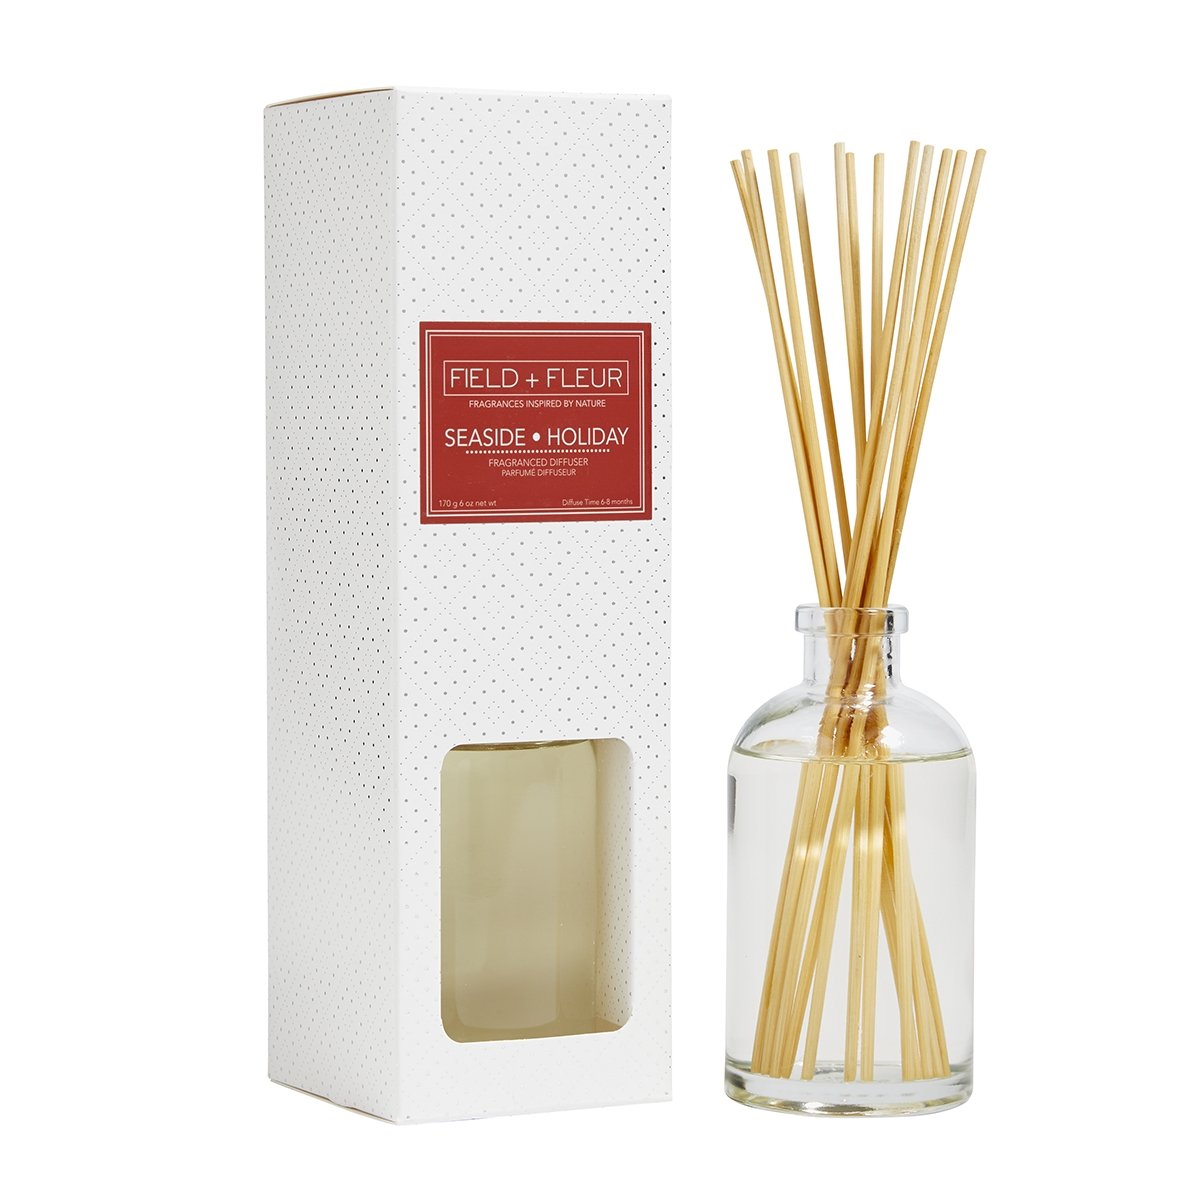 Seaside Holiday Diffuser